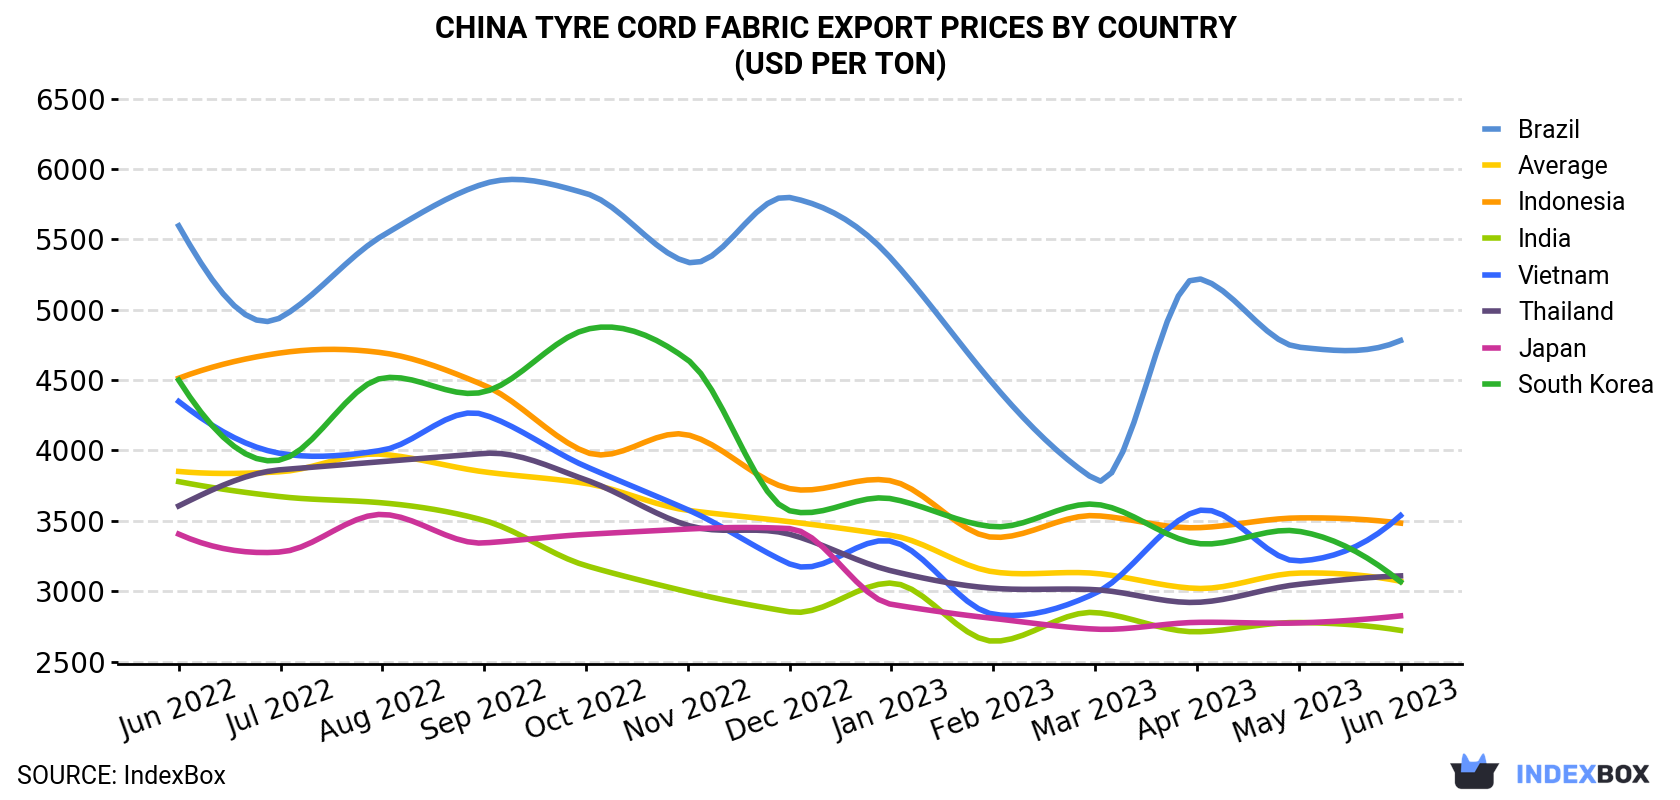 China Tyre Cord Fabric Export Prices By Country (USD Per Ton)